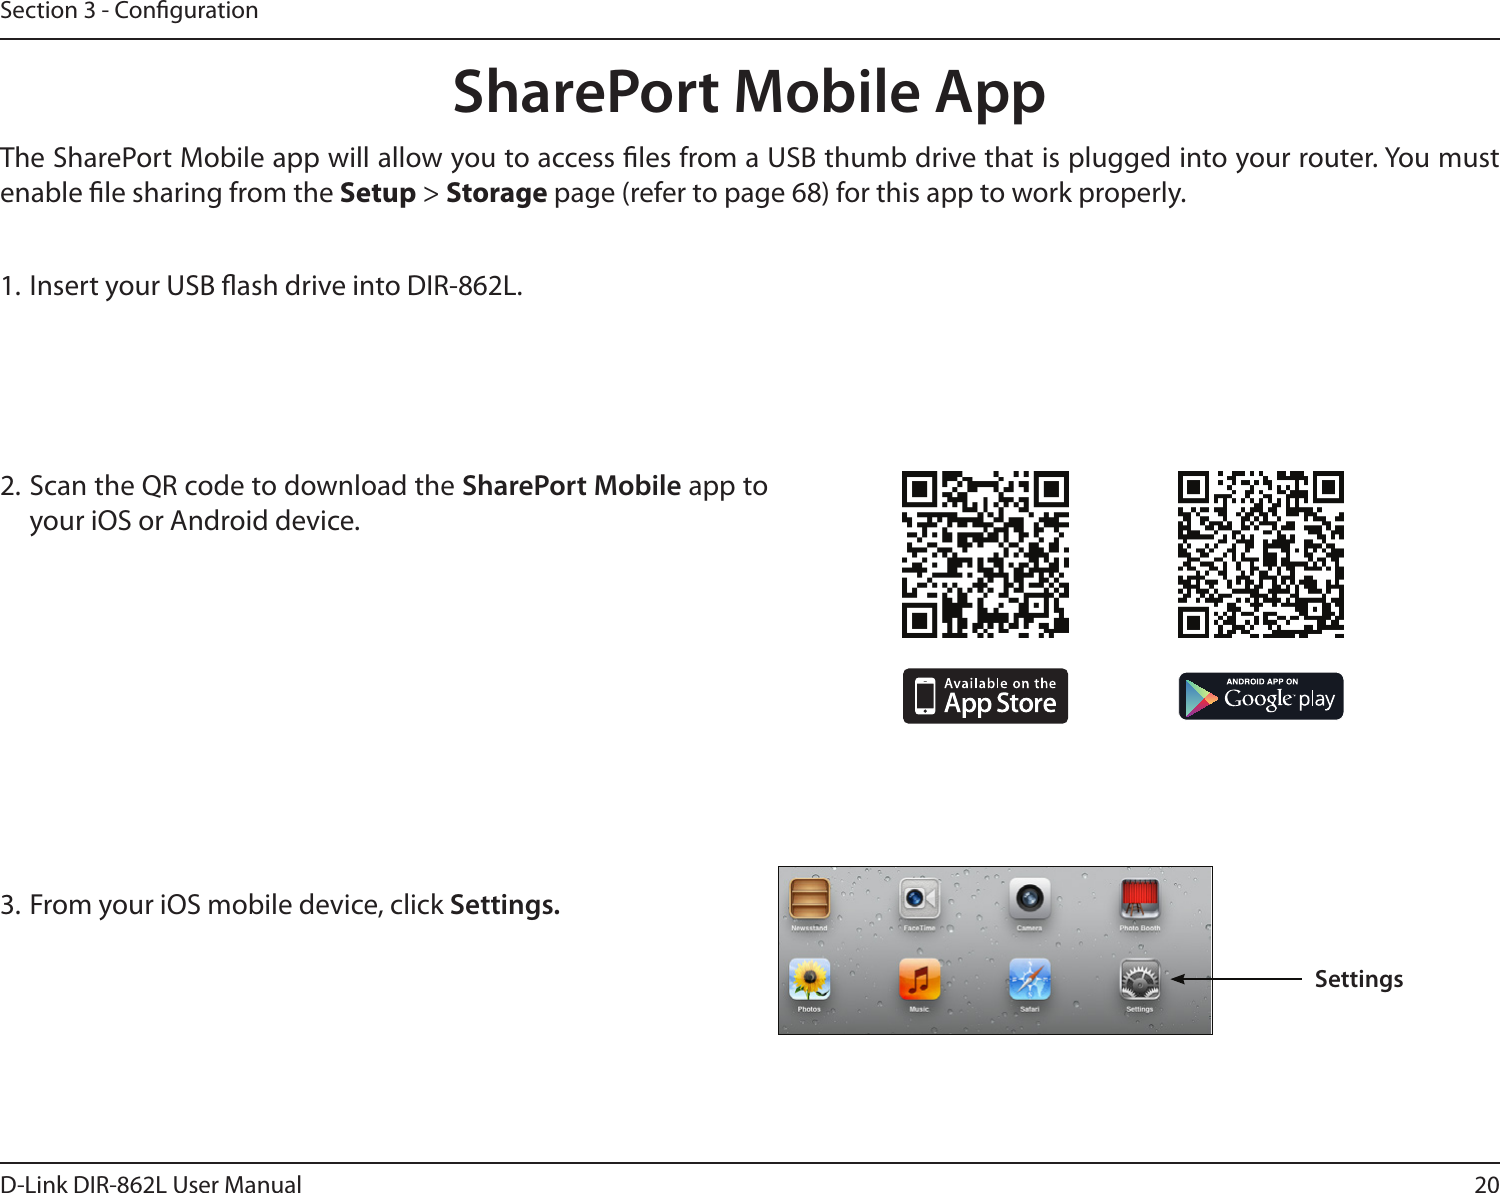 20D-Link DIR-862L User ManualSection 3 - Conguration1. Insert your USB ash drive into DIR-862L.2. Scan the QR code to download the SharePort Mobile app to your iOS or Android device.SharePort Mobile App3. From your iOS mobile device, click Settings. The SharePort Mobile app will allow you to access les from a USB thumb drive that is plugged into your router. You must enable le sharing from the Setup &gt; Storage page (refer to page 68) for this app to work properly.Settings